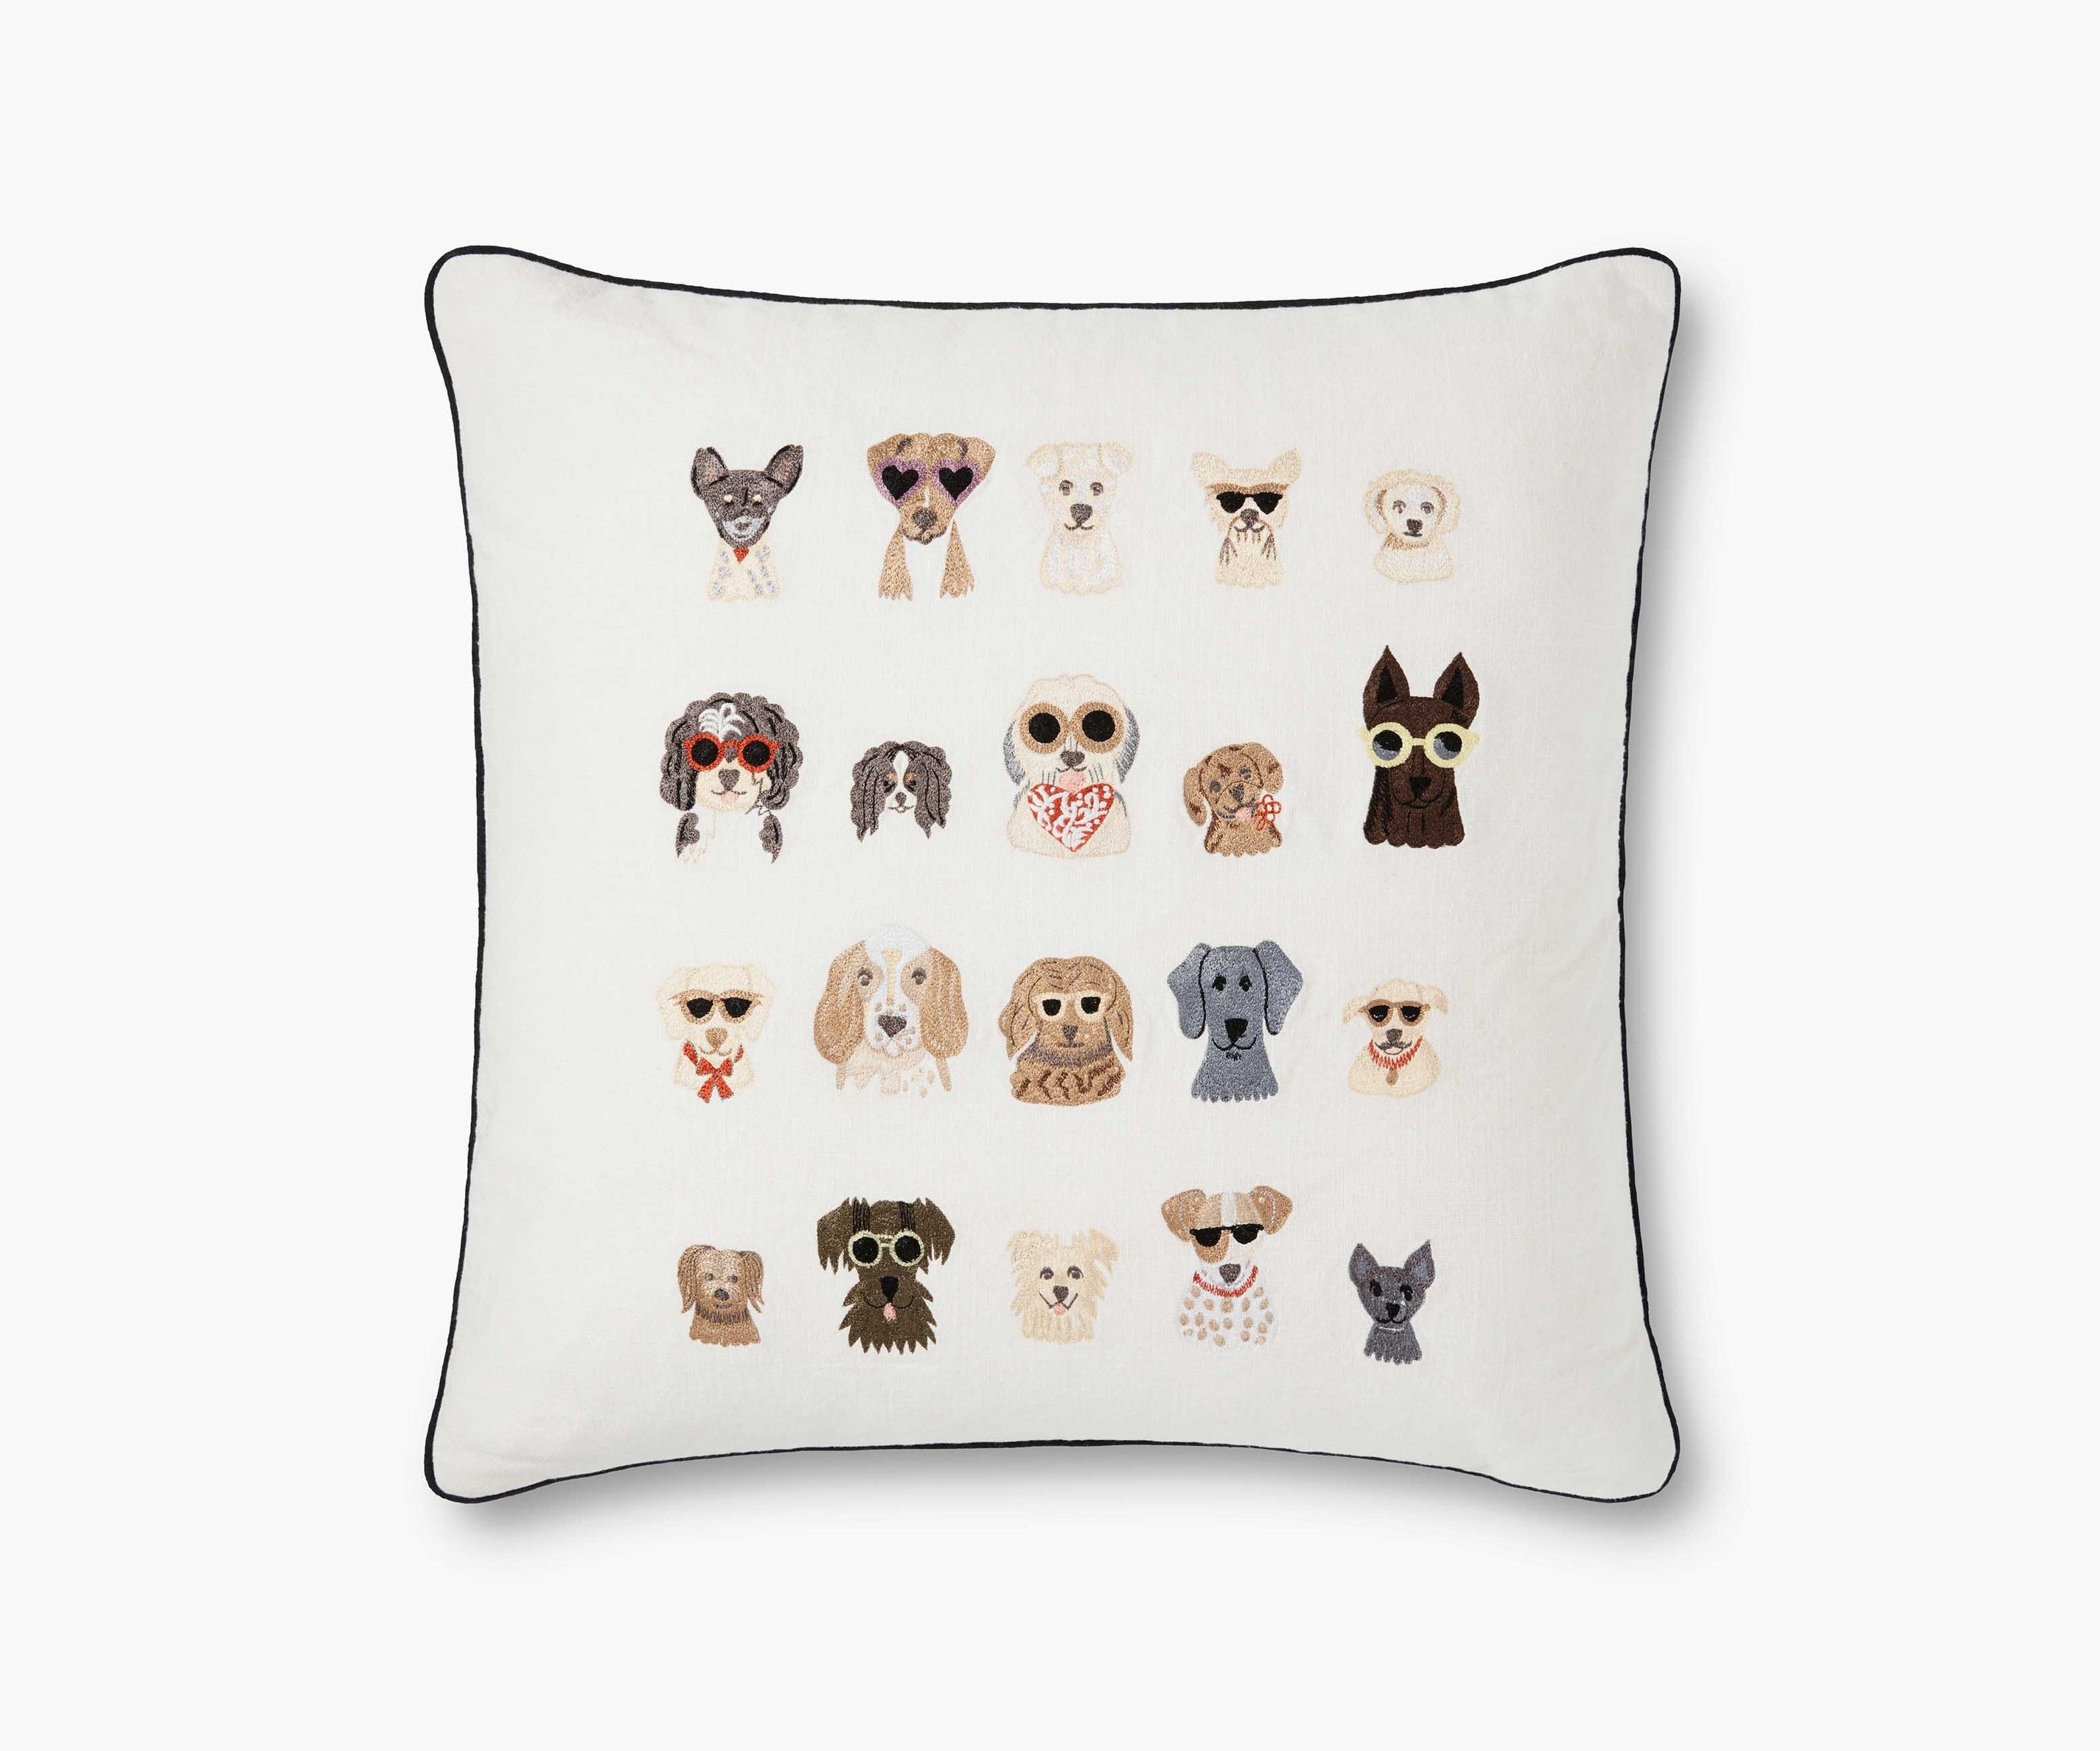 a pillow cover embroidered with 20 different dogs wearing sunglasses and bandanas